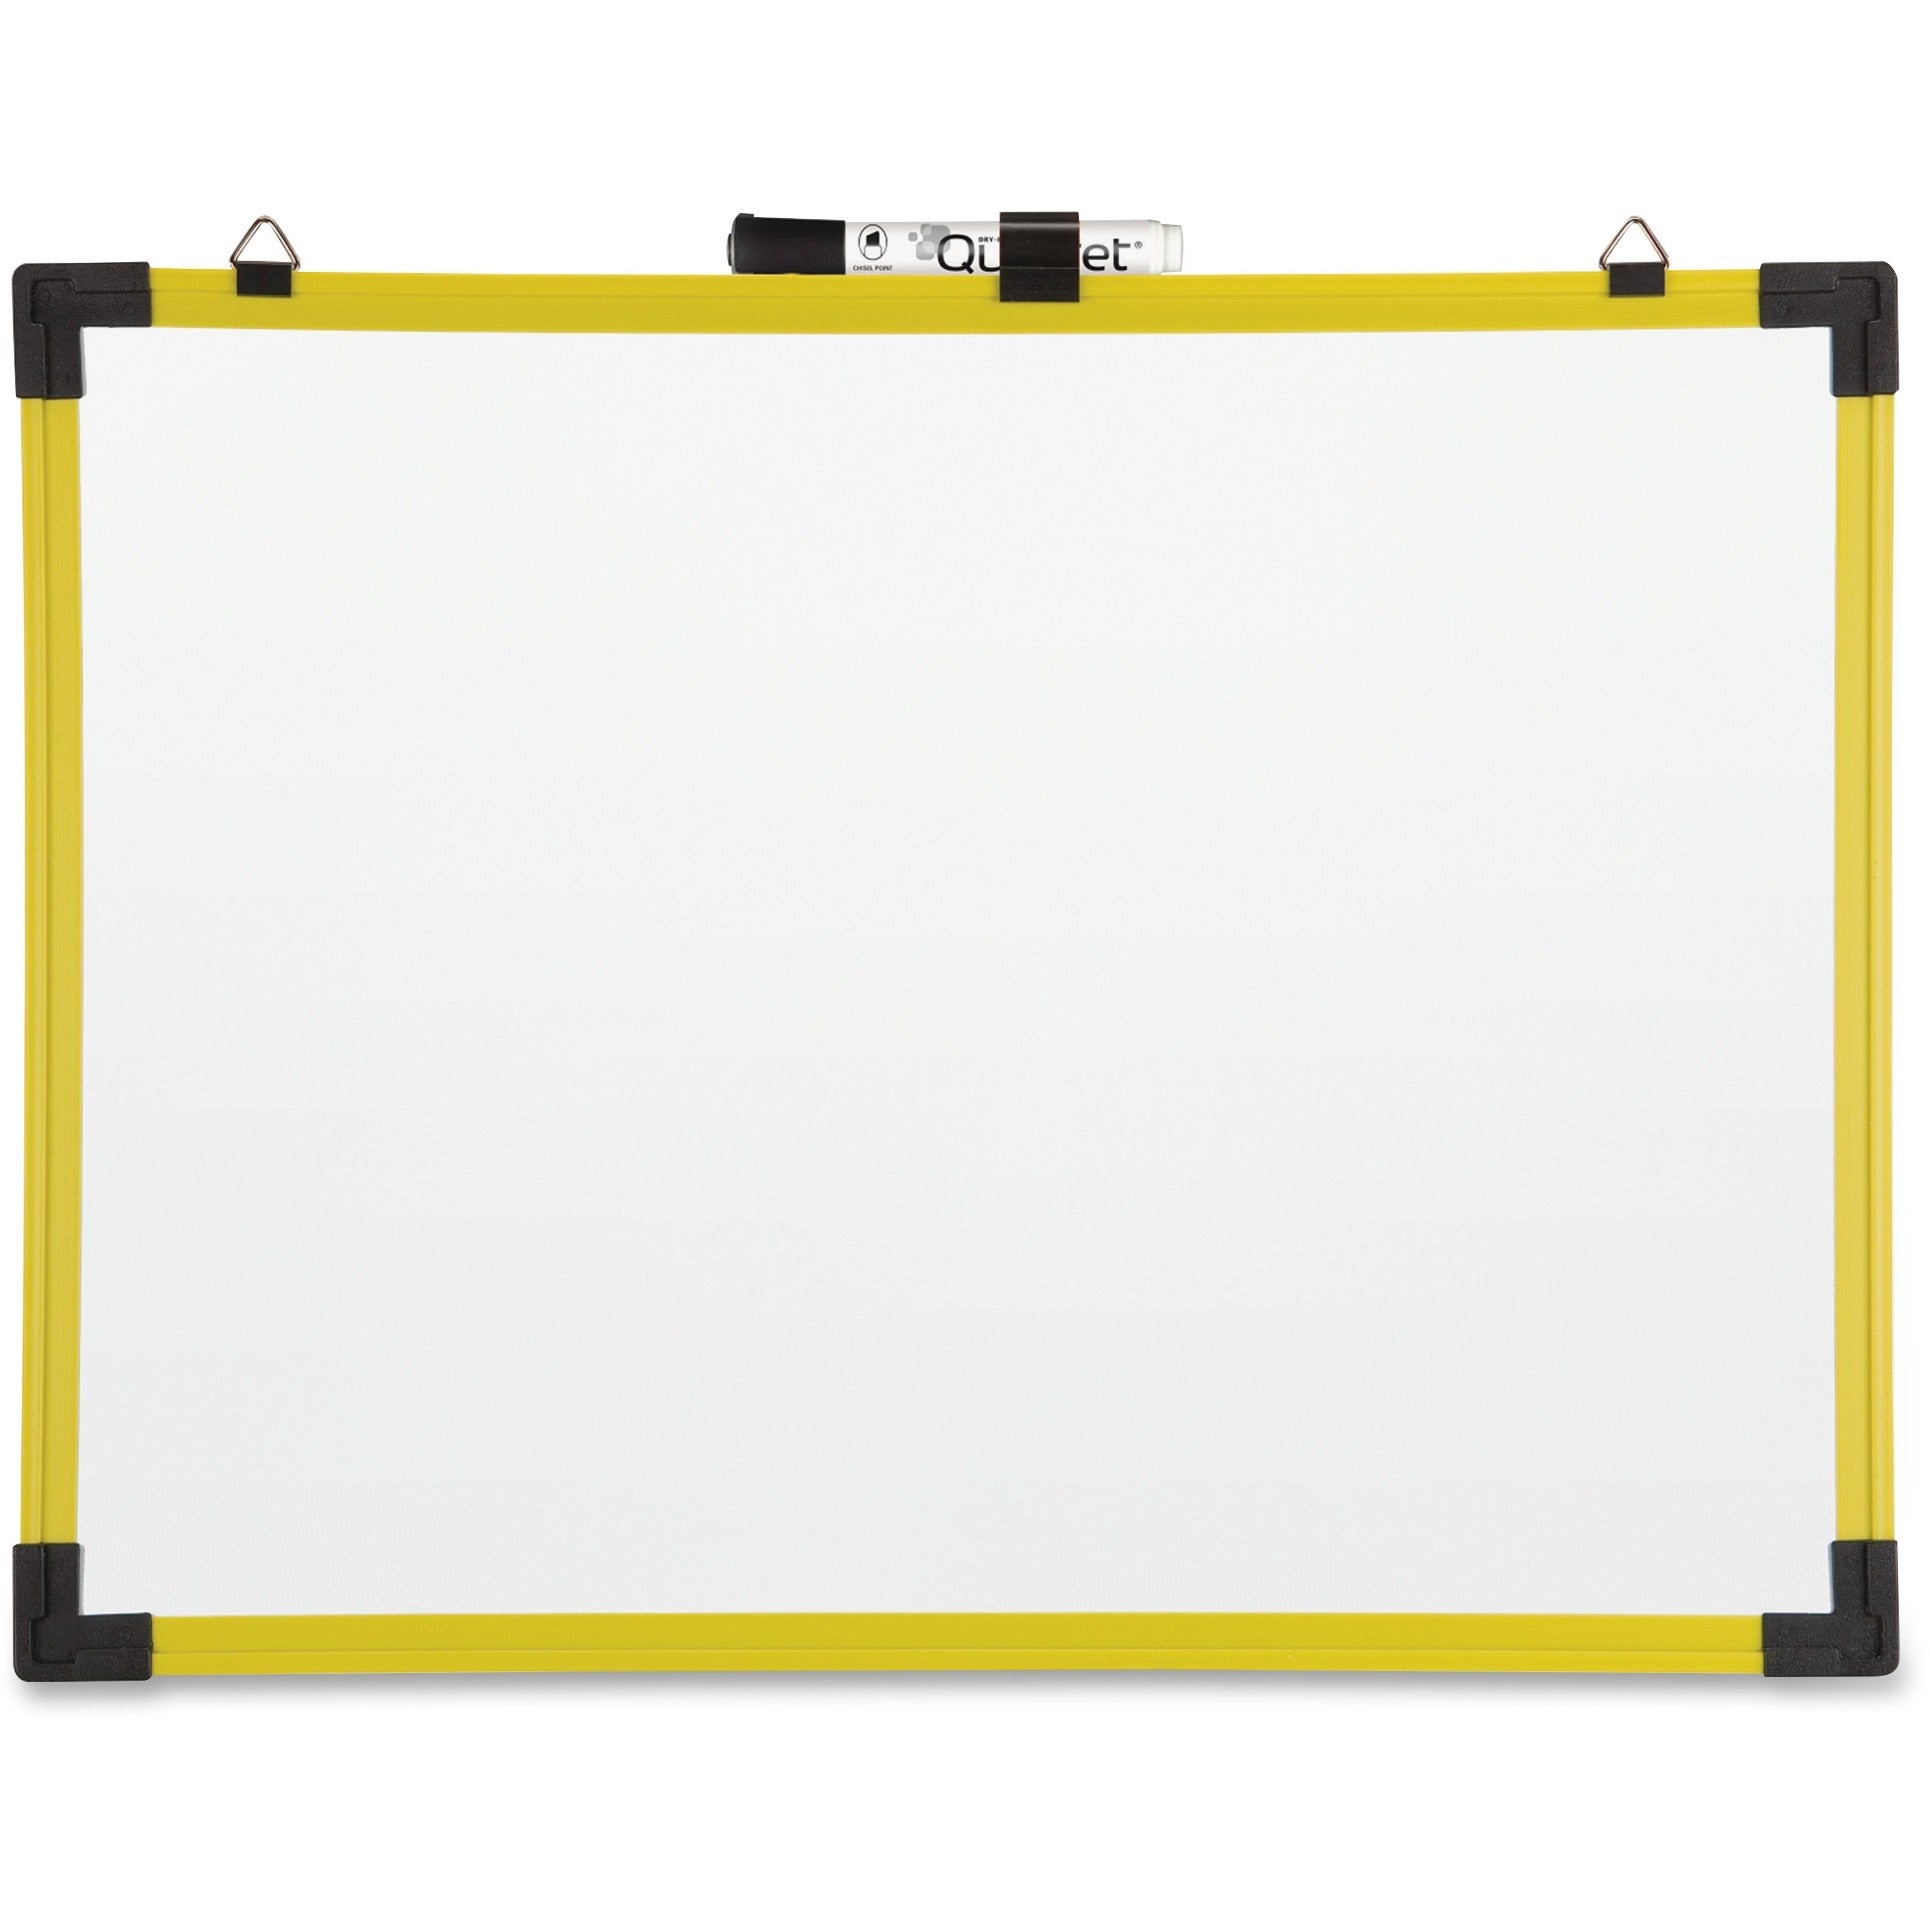 quartet-industrial-magnetic-whiteboard-72-6-ft-width-x-48-4-ft-height-white-painted-steel-surface-bright-yellow-aluminum-frame-rectangle-horizontal-magnetic-1-each_qrt724127 - 2